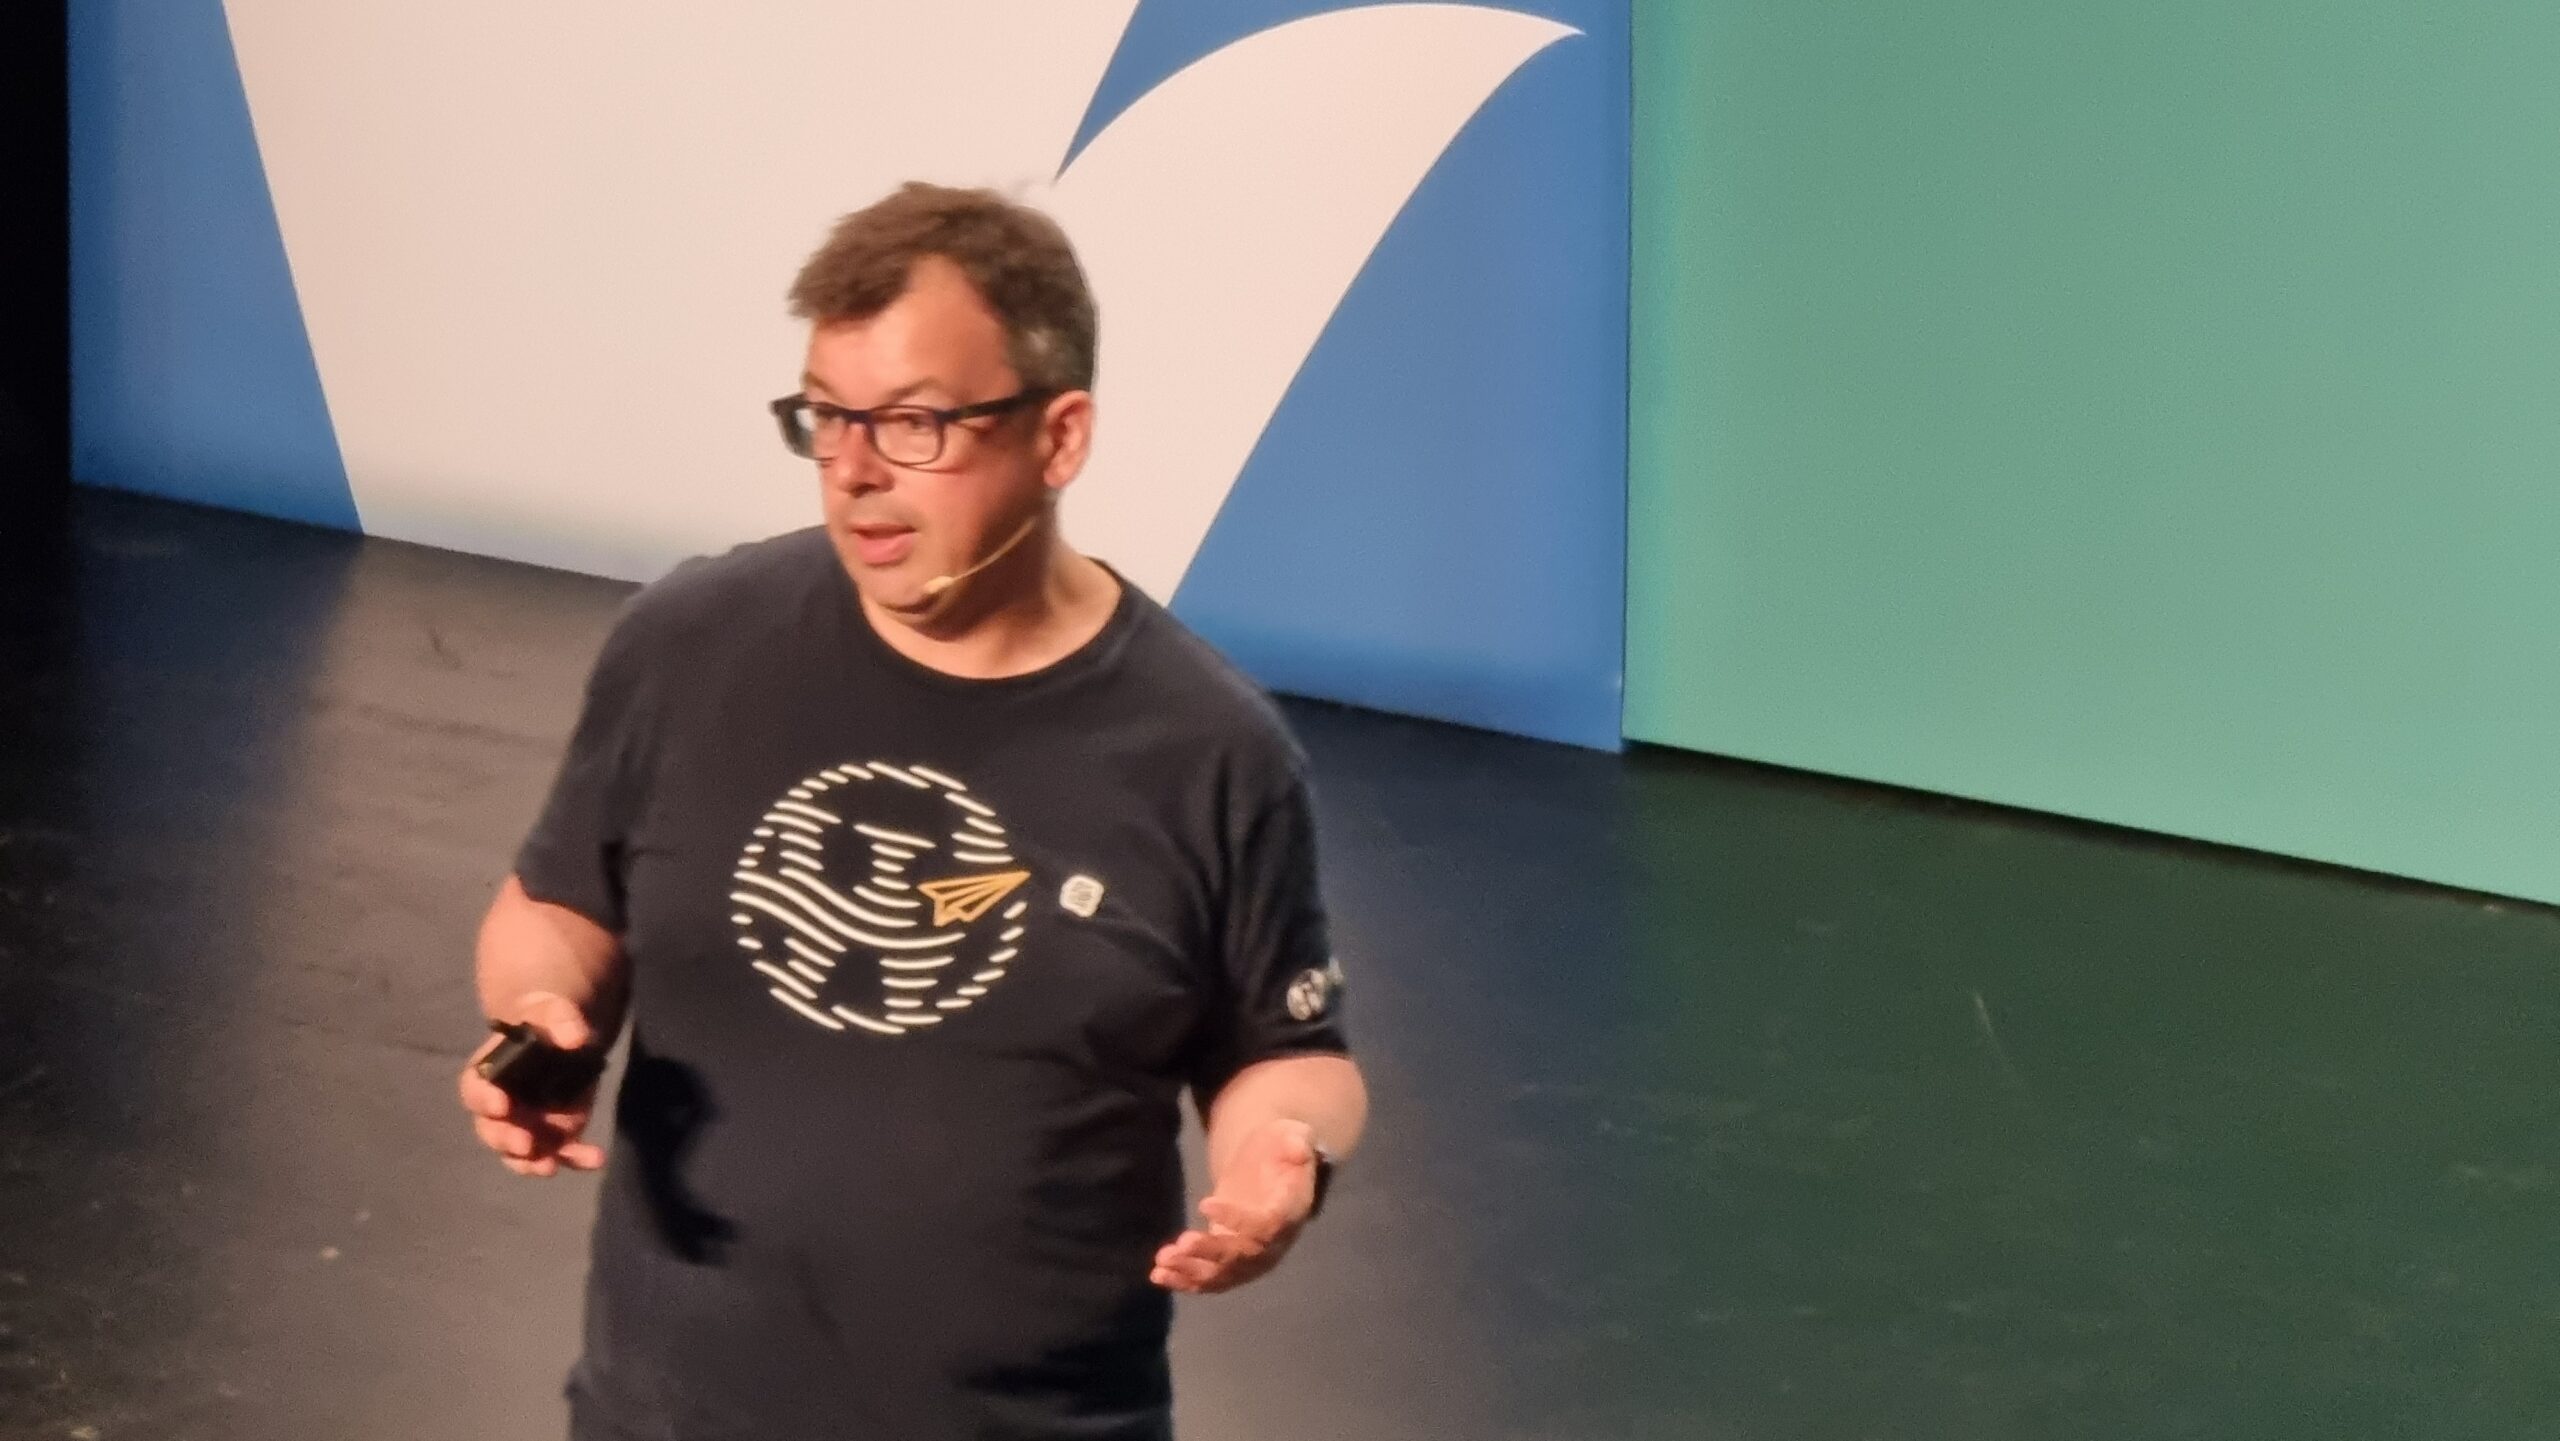 A man wearing glasses and a t-shirt with a WordPress logo stands on a stage.